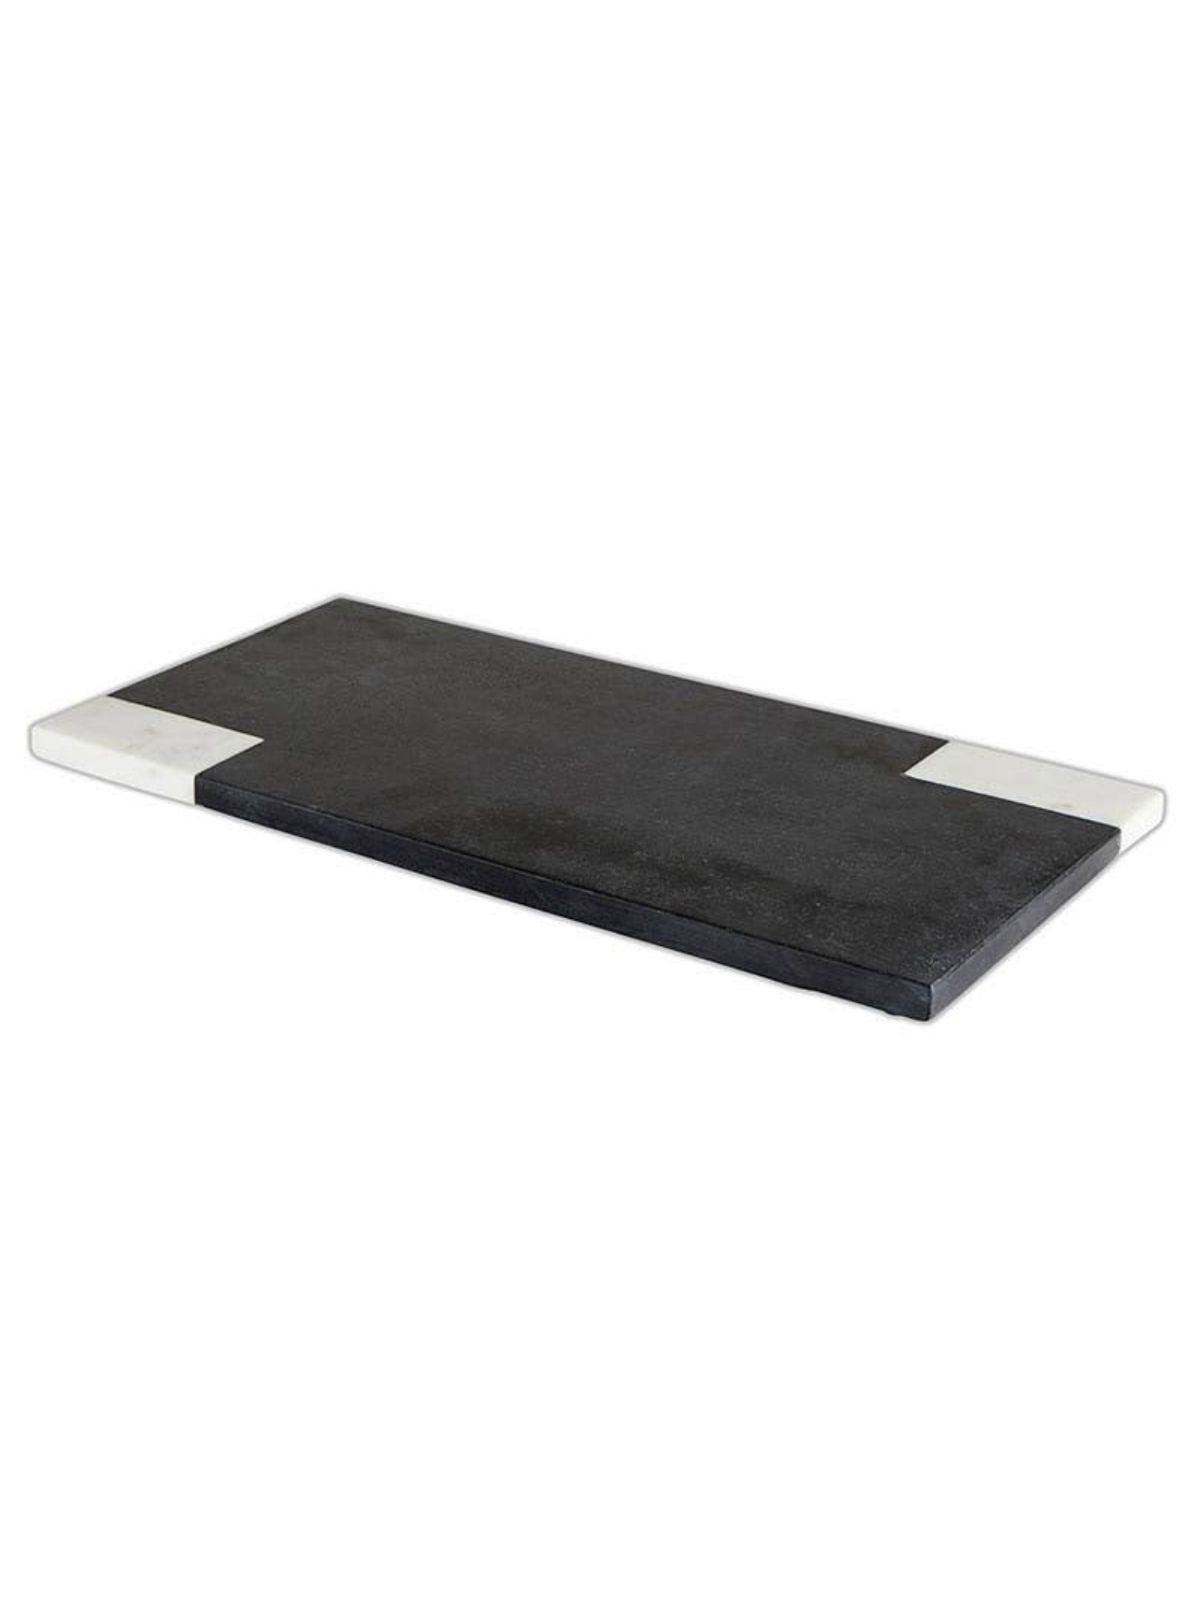 18 inch Luxury Black and White Marble Rectangular Serving Board. 